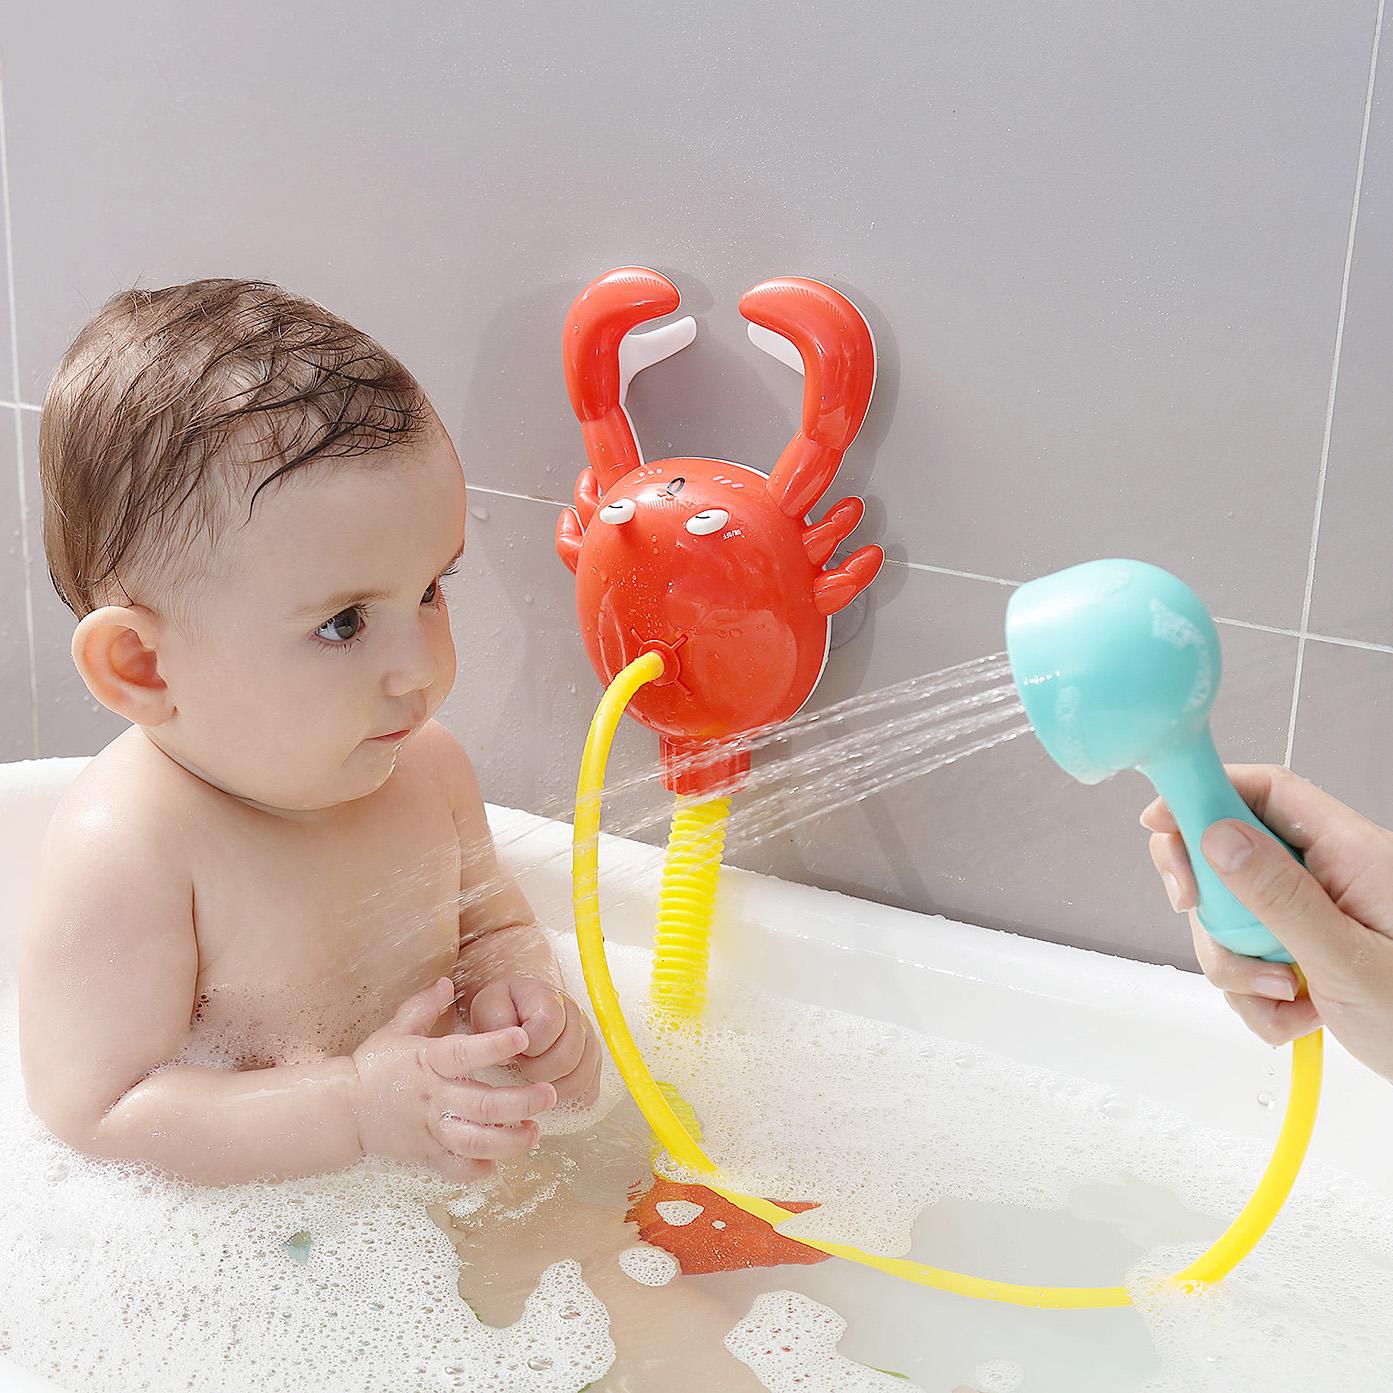 New Arrive : Mambobaby Baby Bath Shower Toy